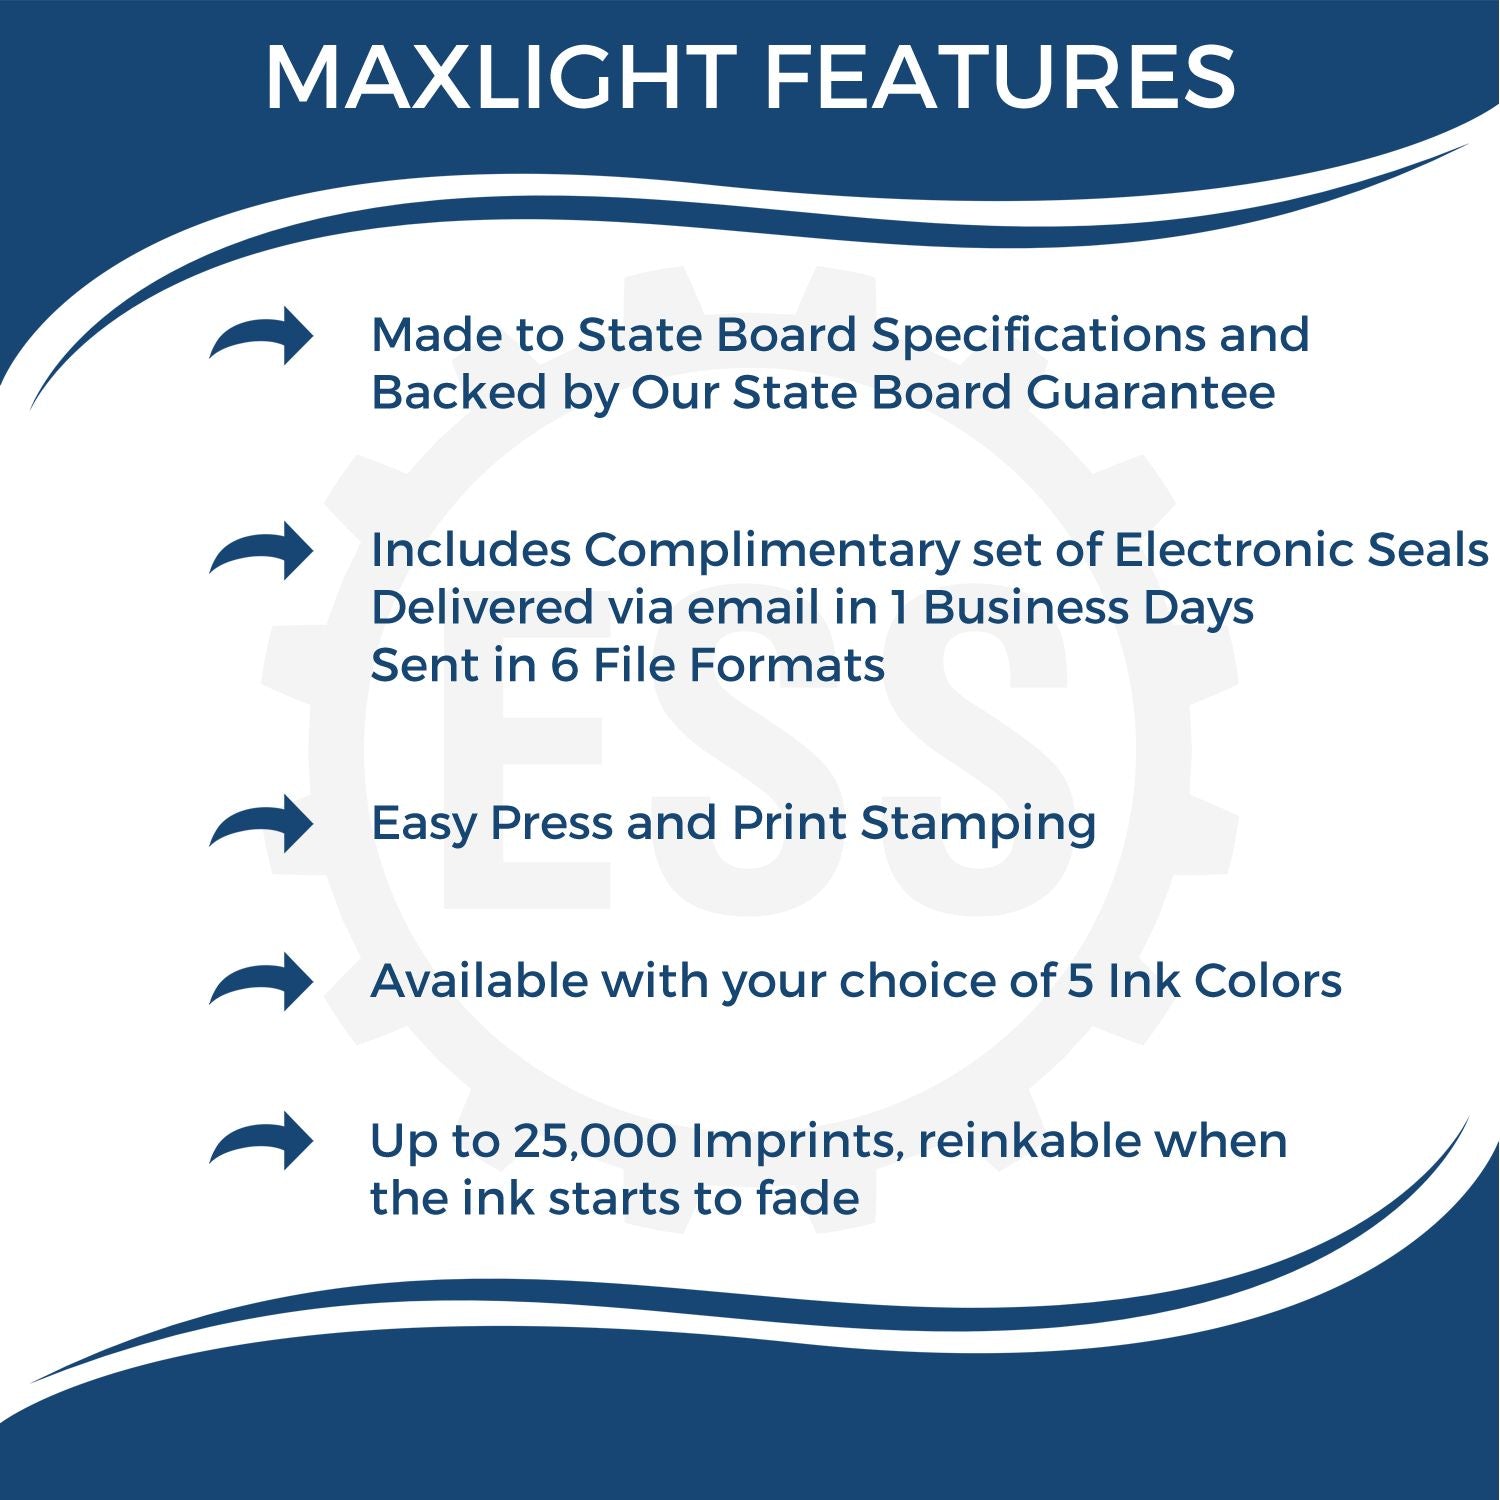 A picture of an infographic highlighting the selling points for the Premium MaxLight Pre-Inked Connecticut Engineering Stamp